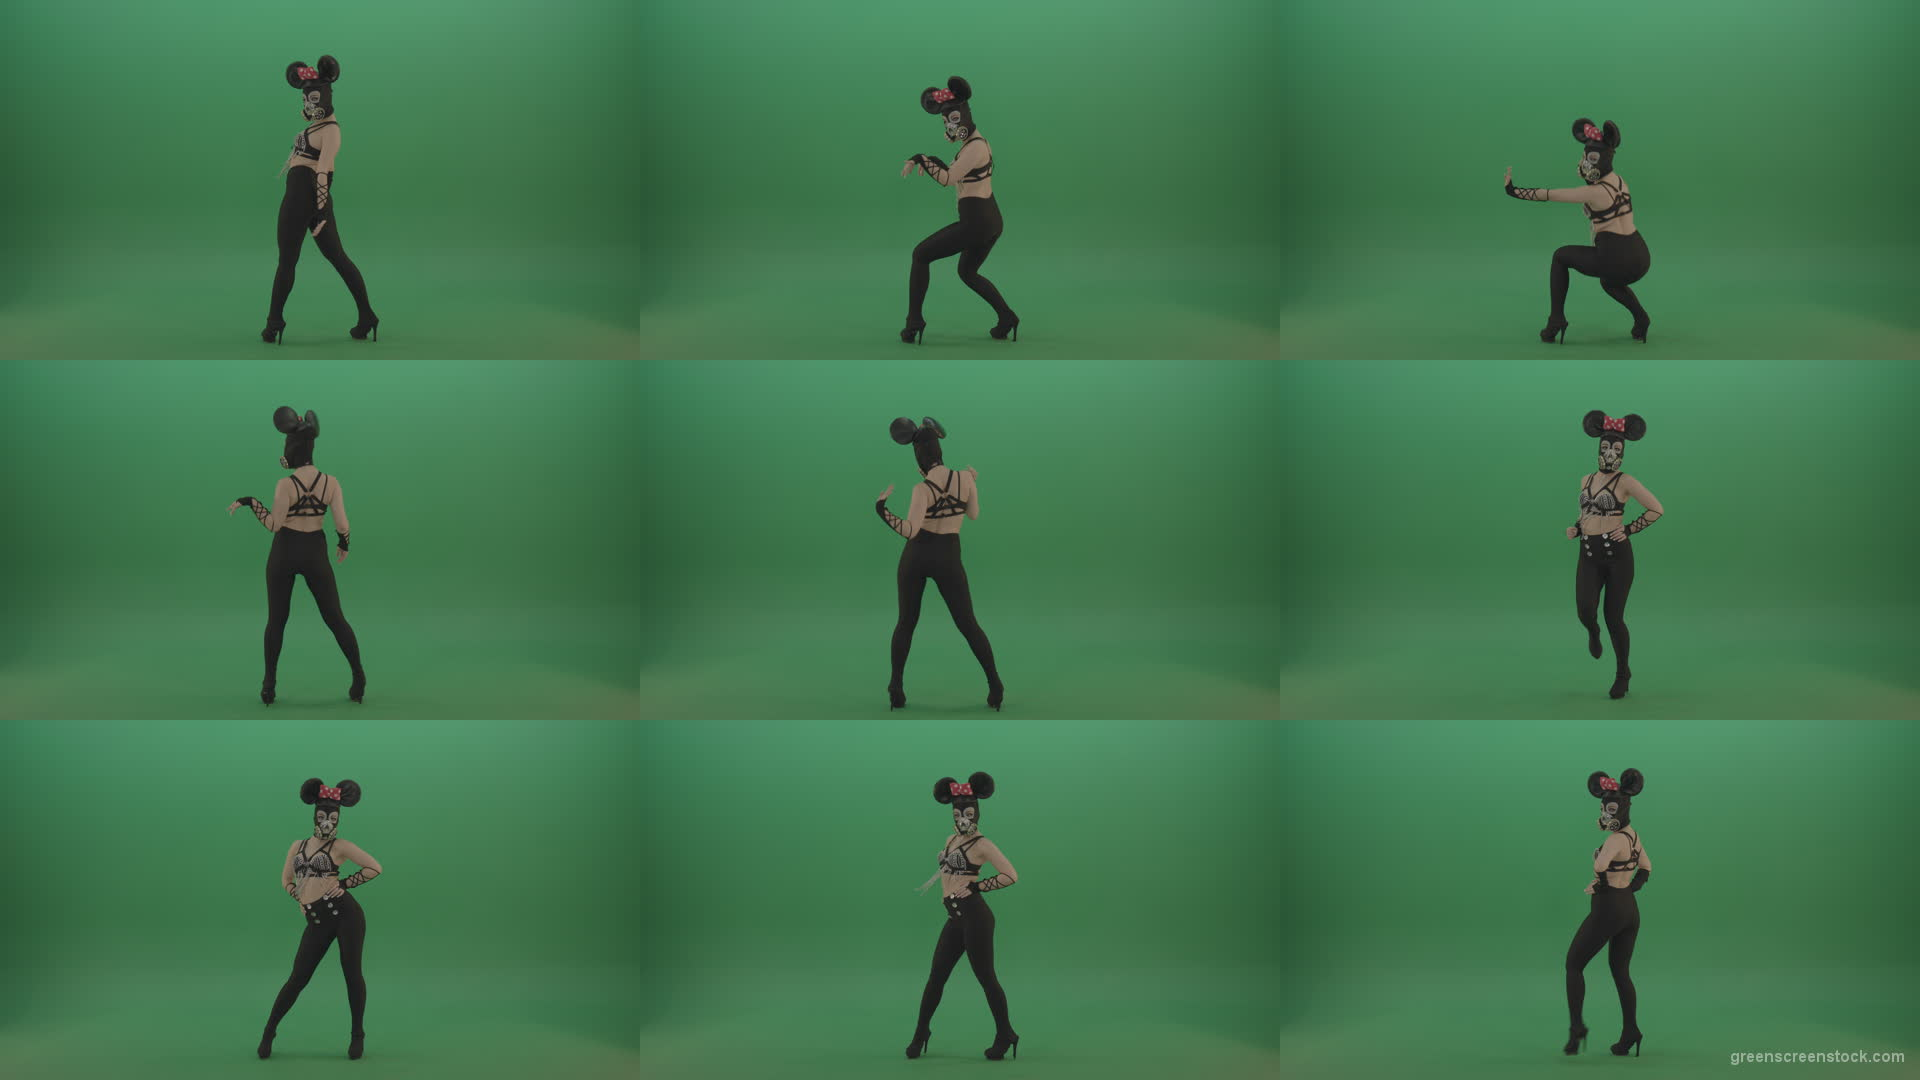 Mouse-Girl-in-mask-dancing-go-go-shaking-ass-and-posing-on-green-screen Green Screen Stock